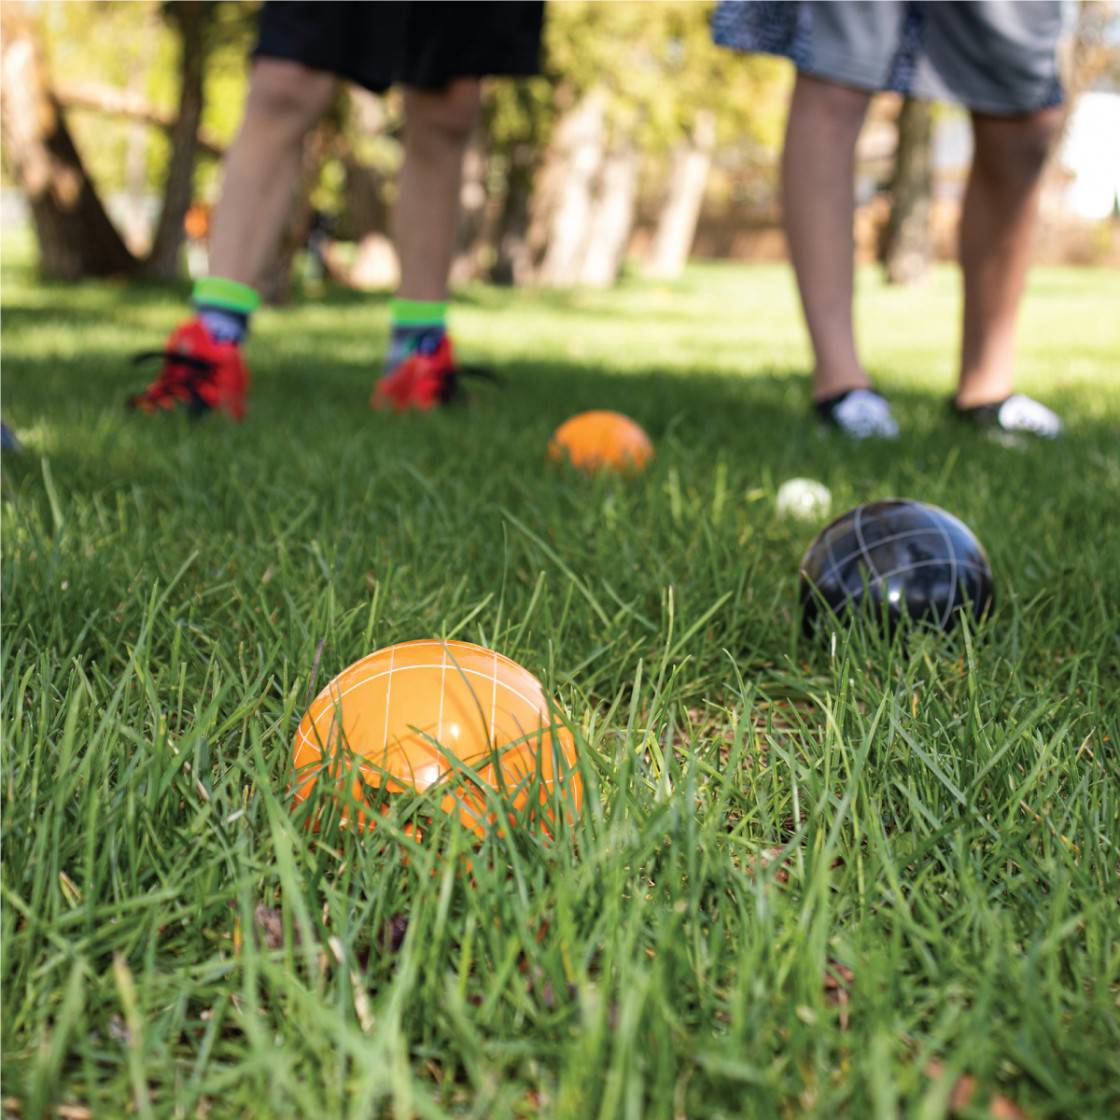 Bocce Ball on the grass